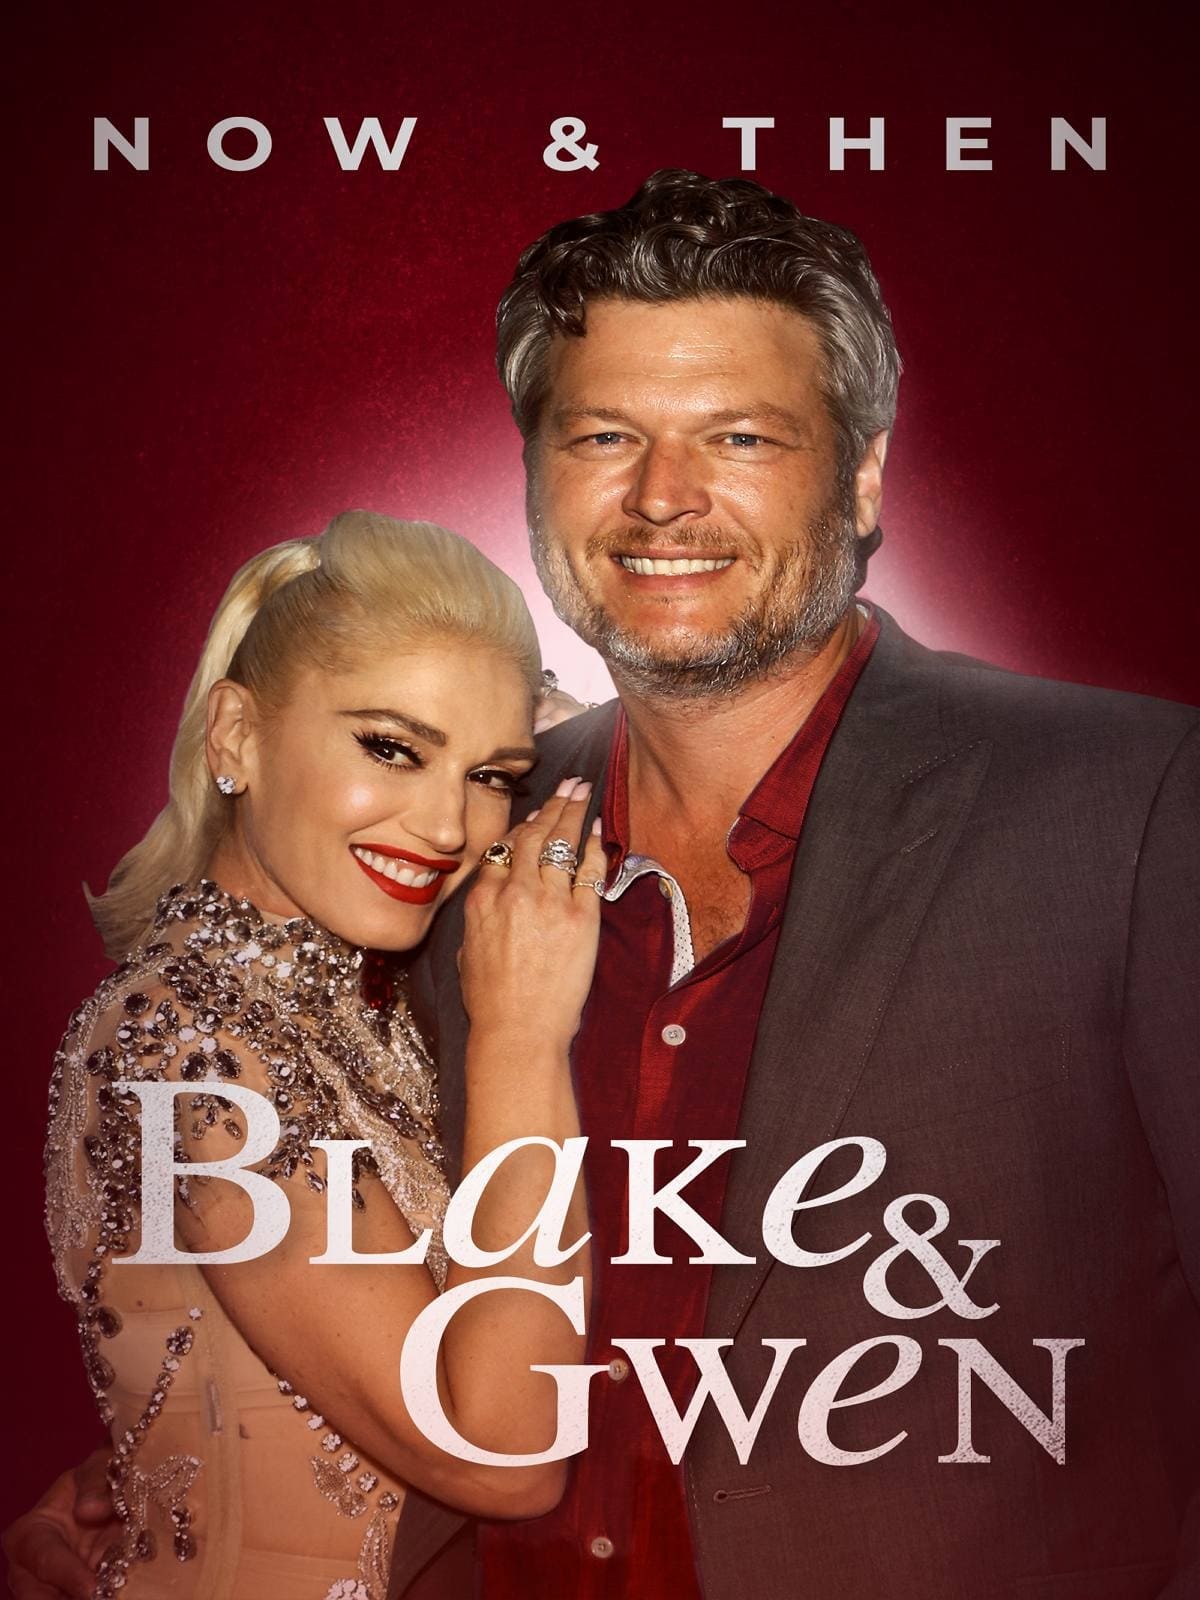 Blake & Gwen: Now & Then on FREECABLE TV